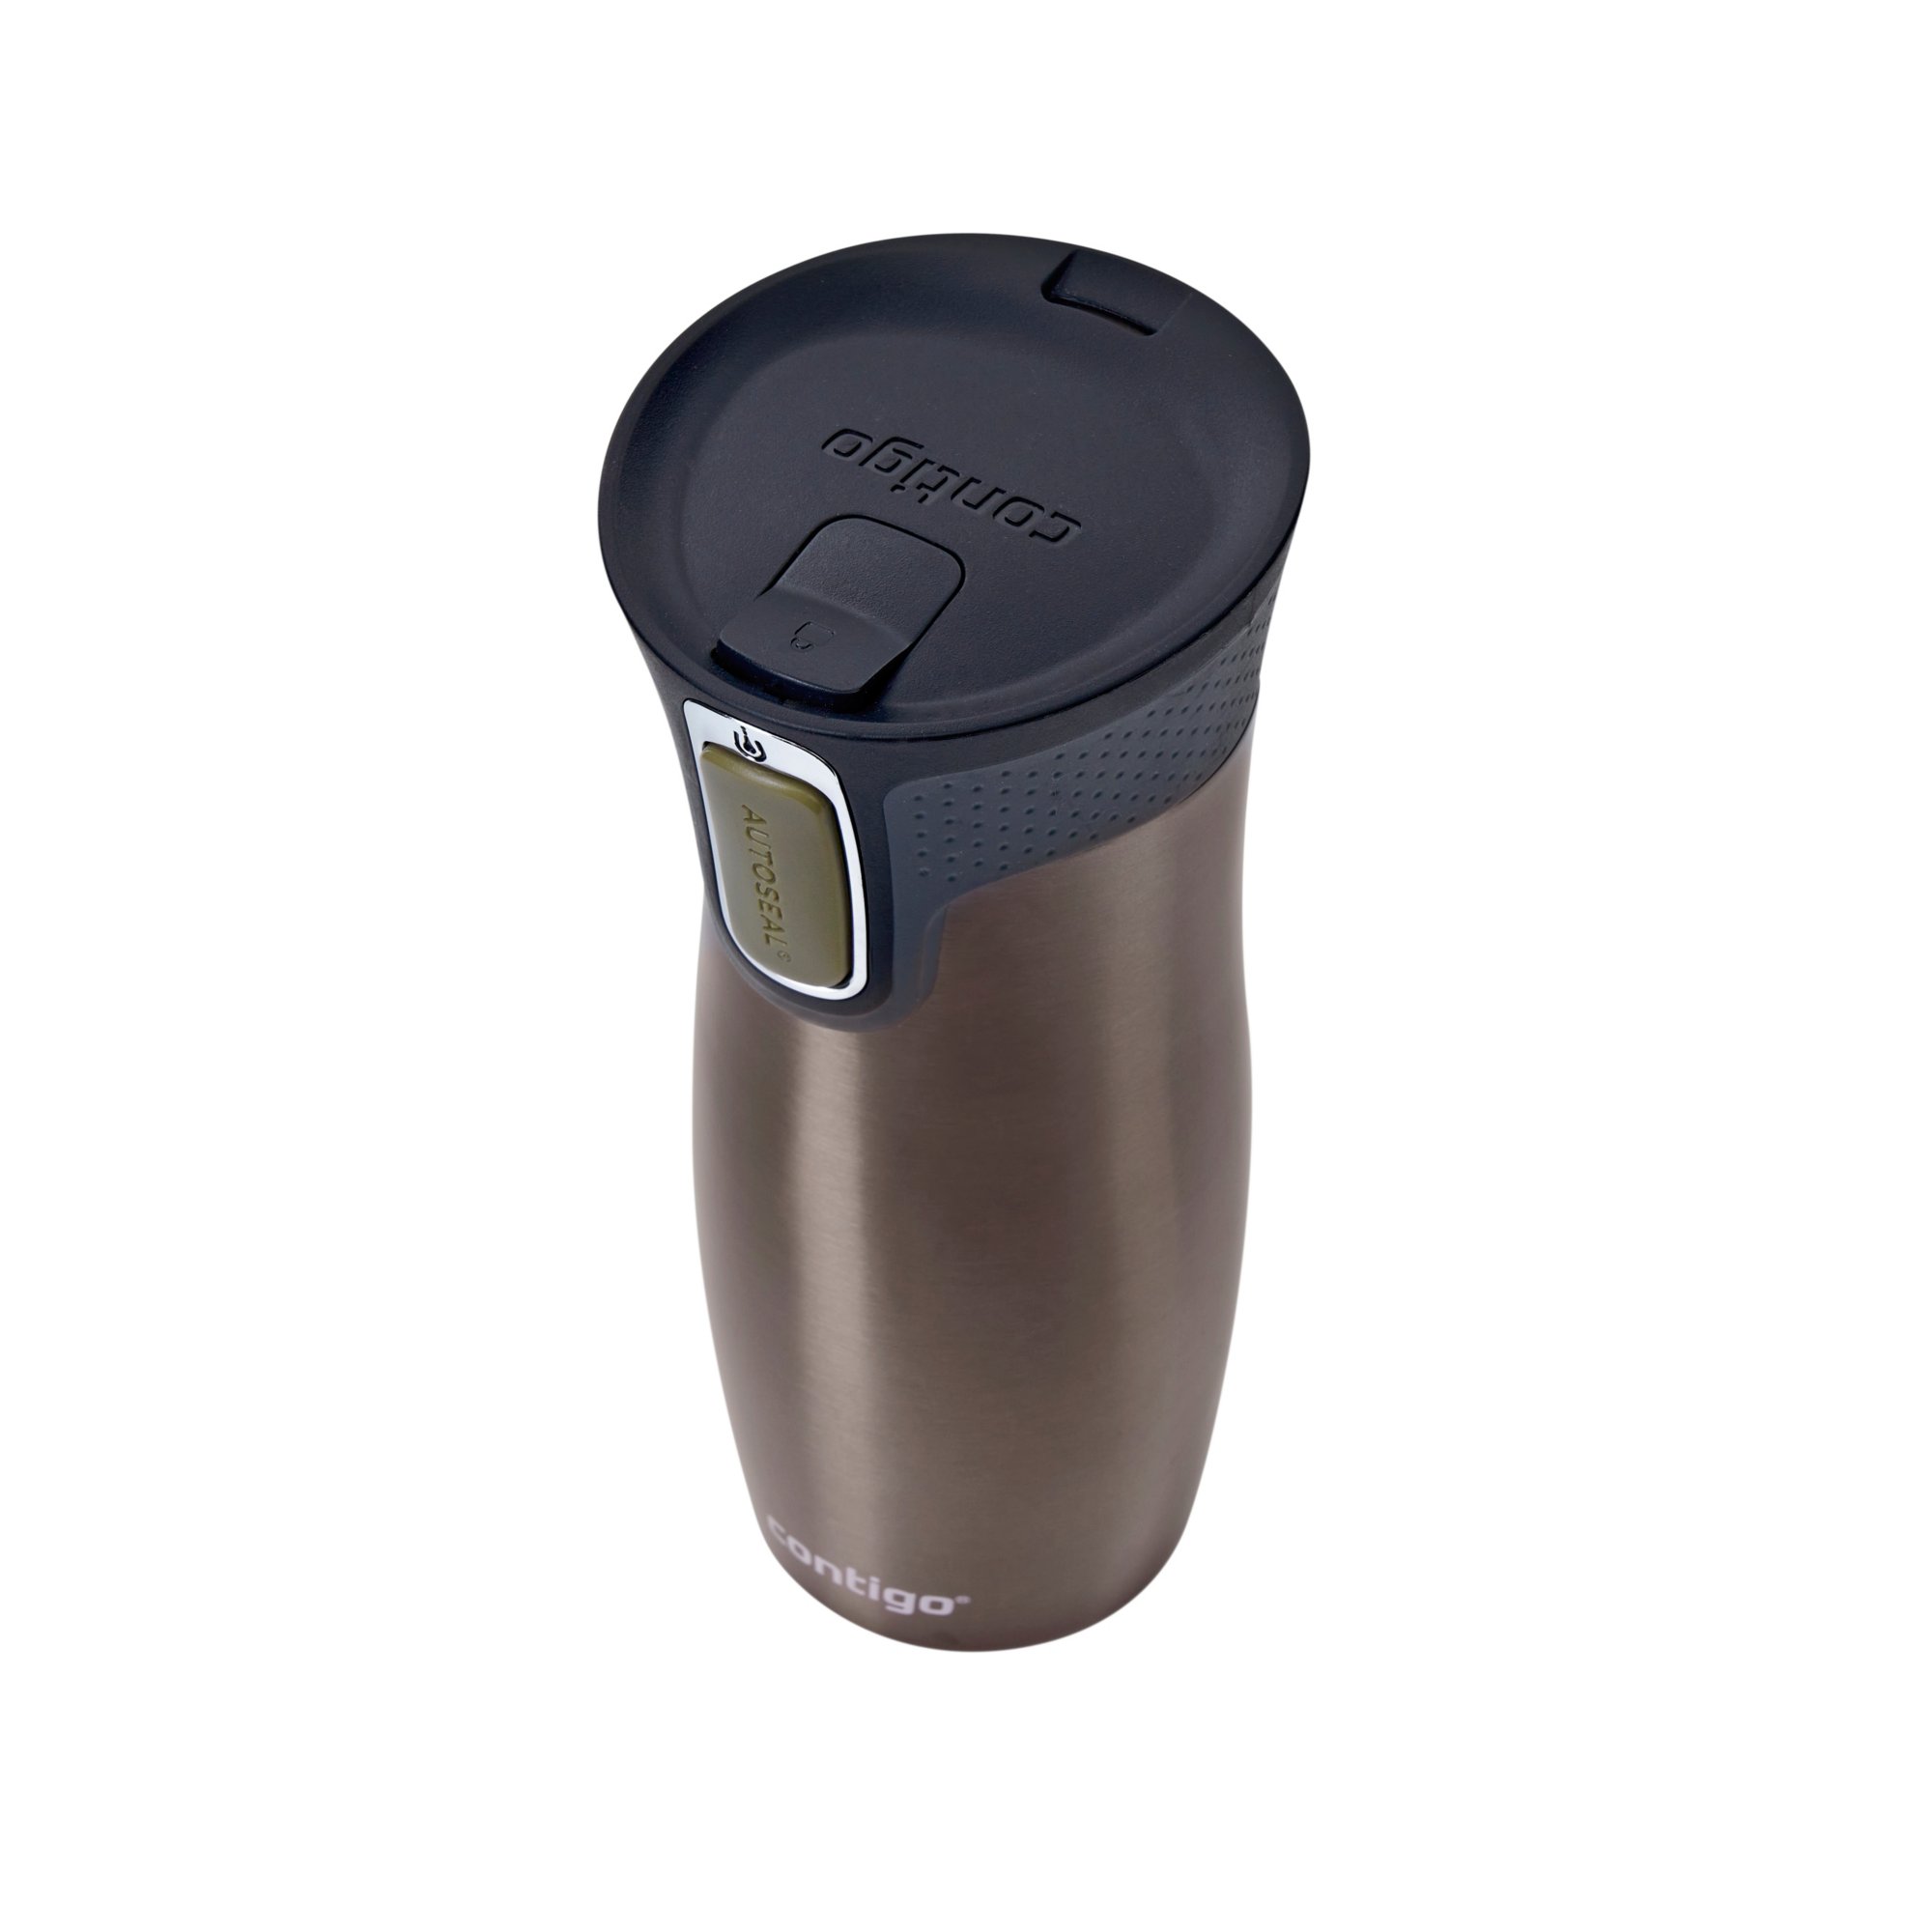 Contigo West Loop Stainless Steel Travel Mug With Autoseal Lid